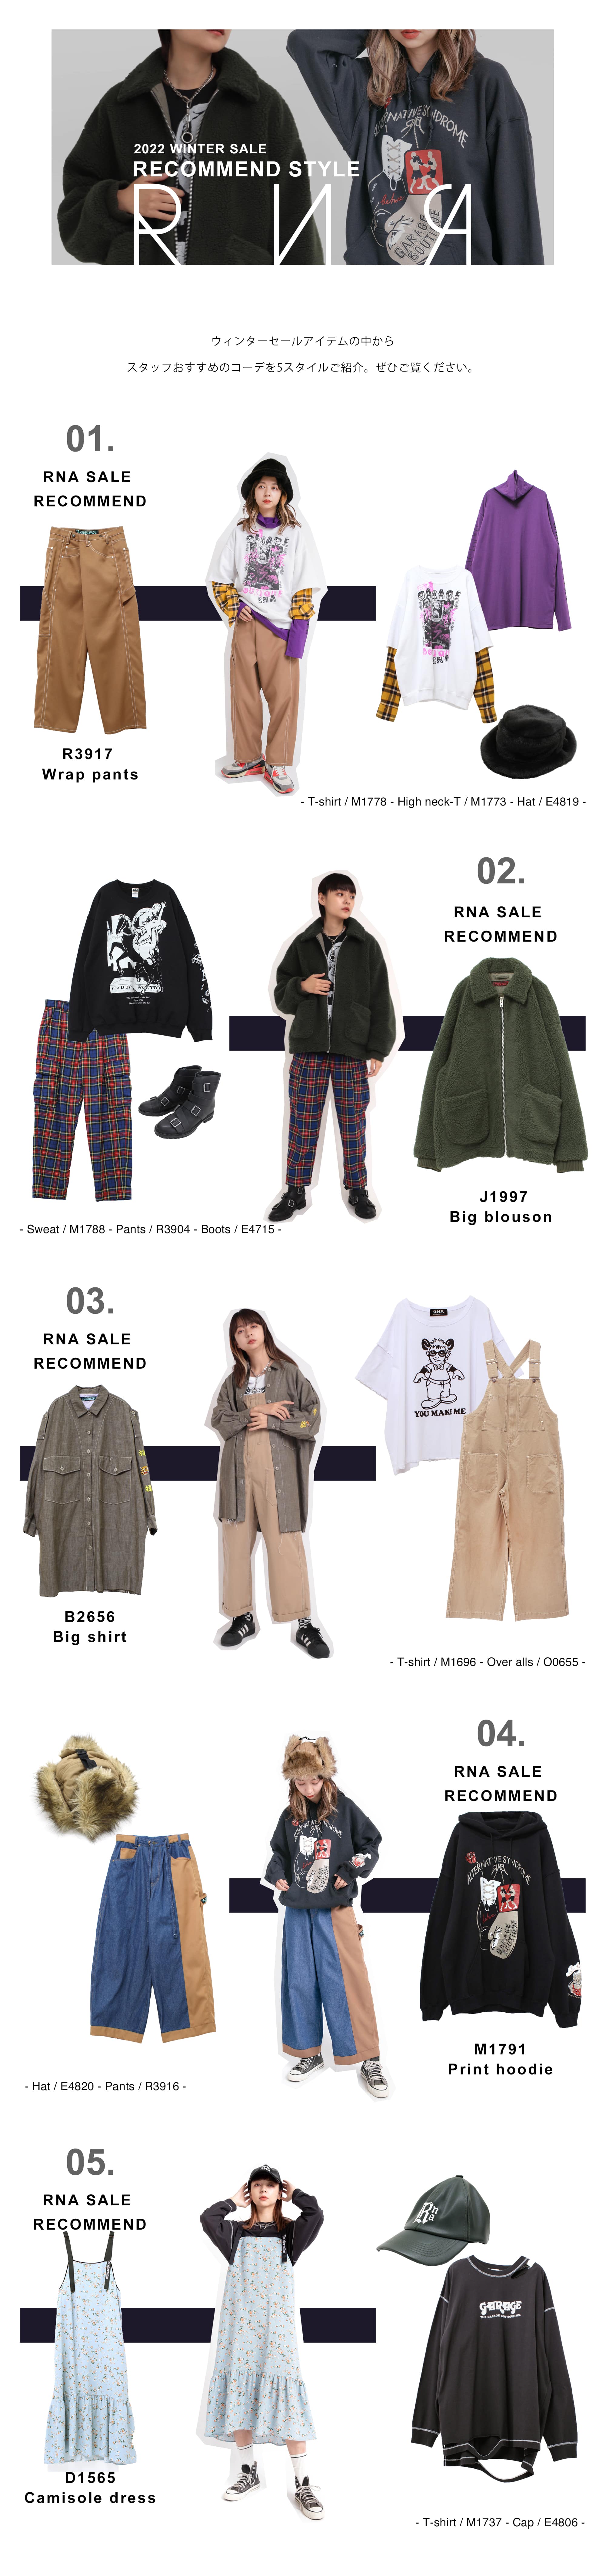 RNA 2022 WINTER SALE RECOMMEND STYLE